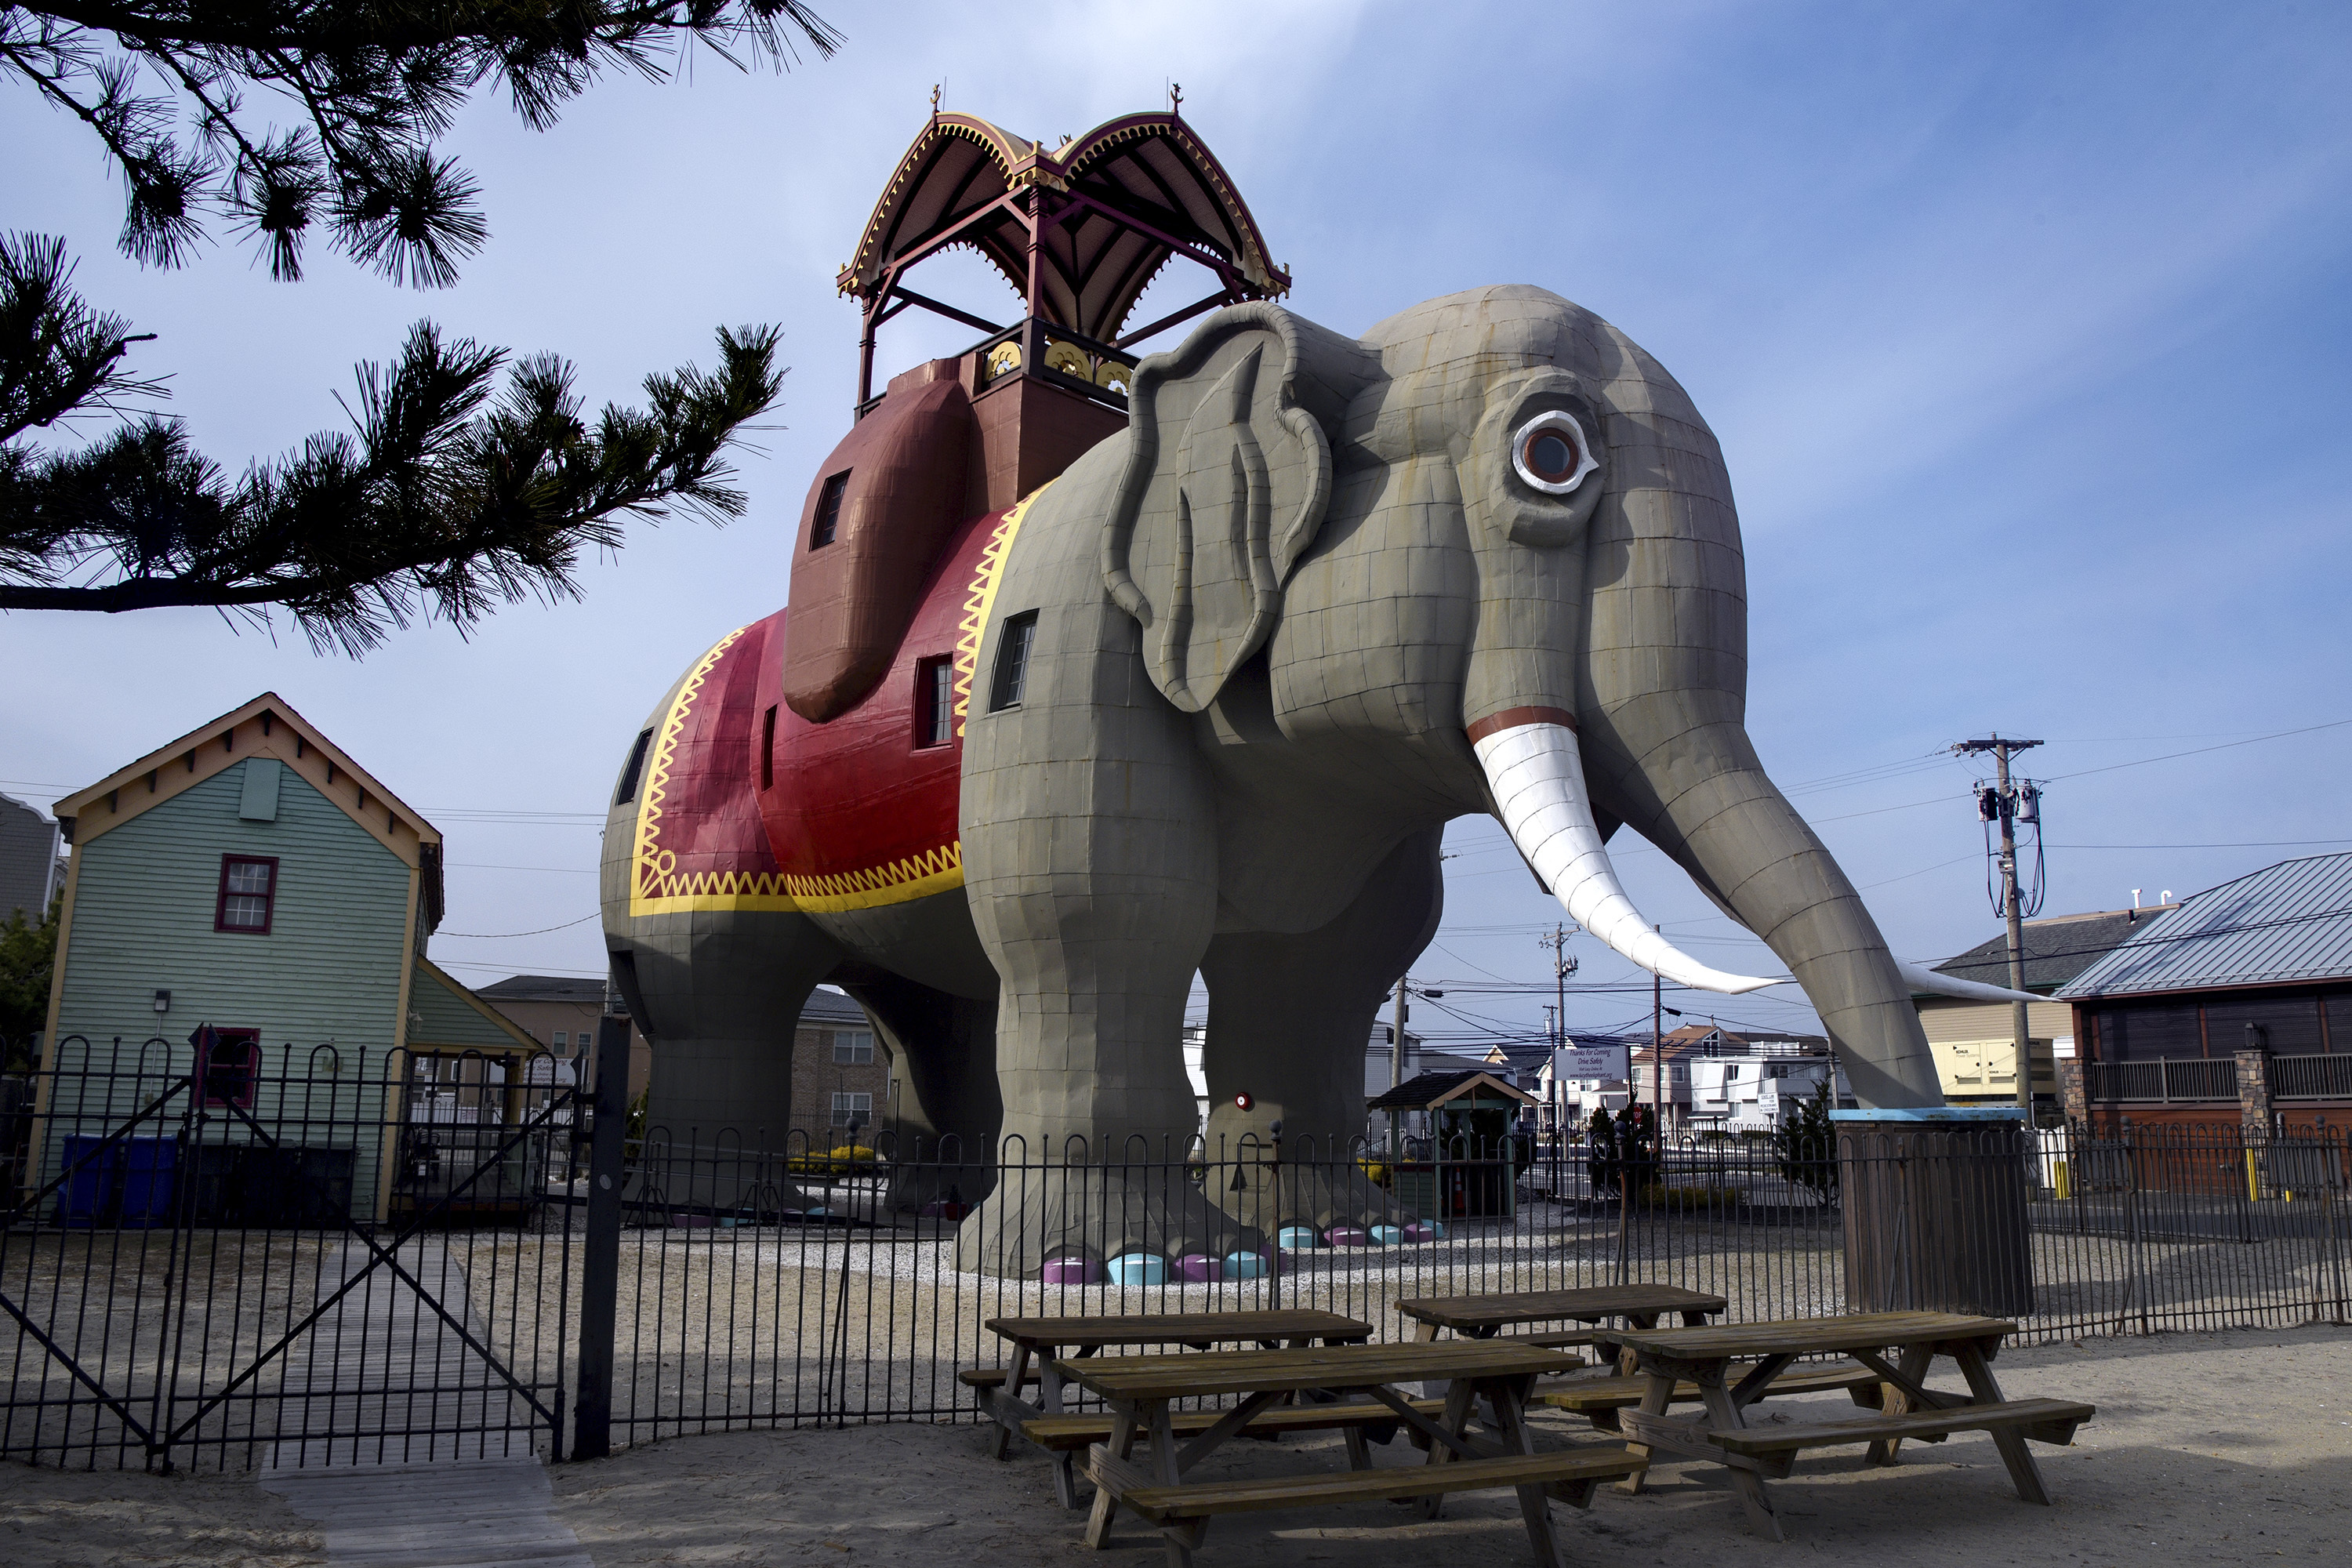 Lucy the Elephant in Margate, N.J., closing temporarily